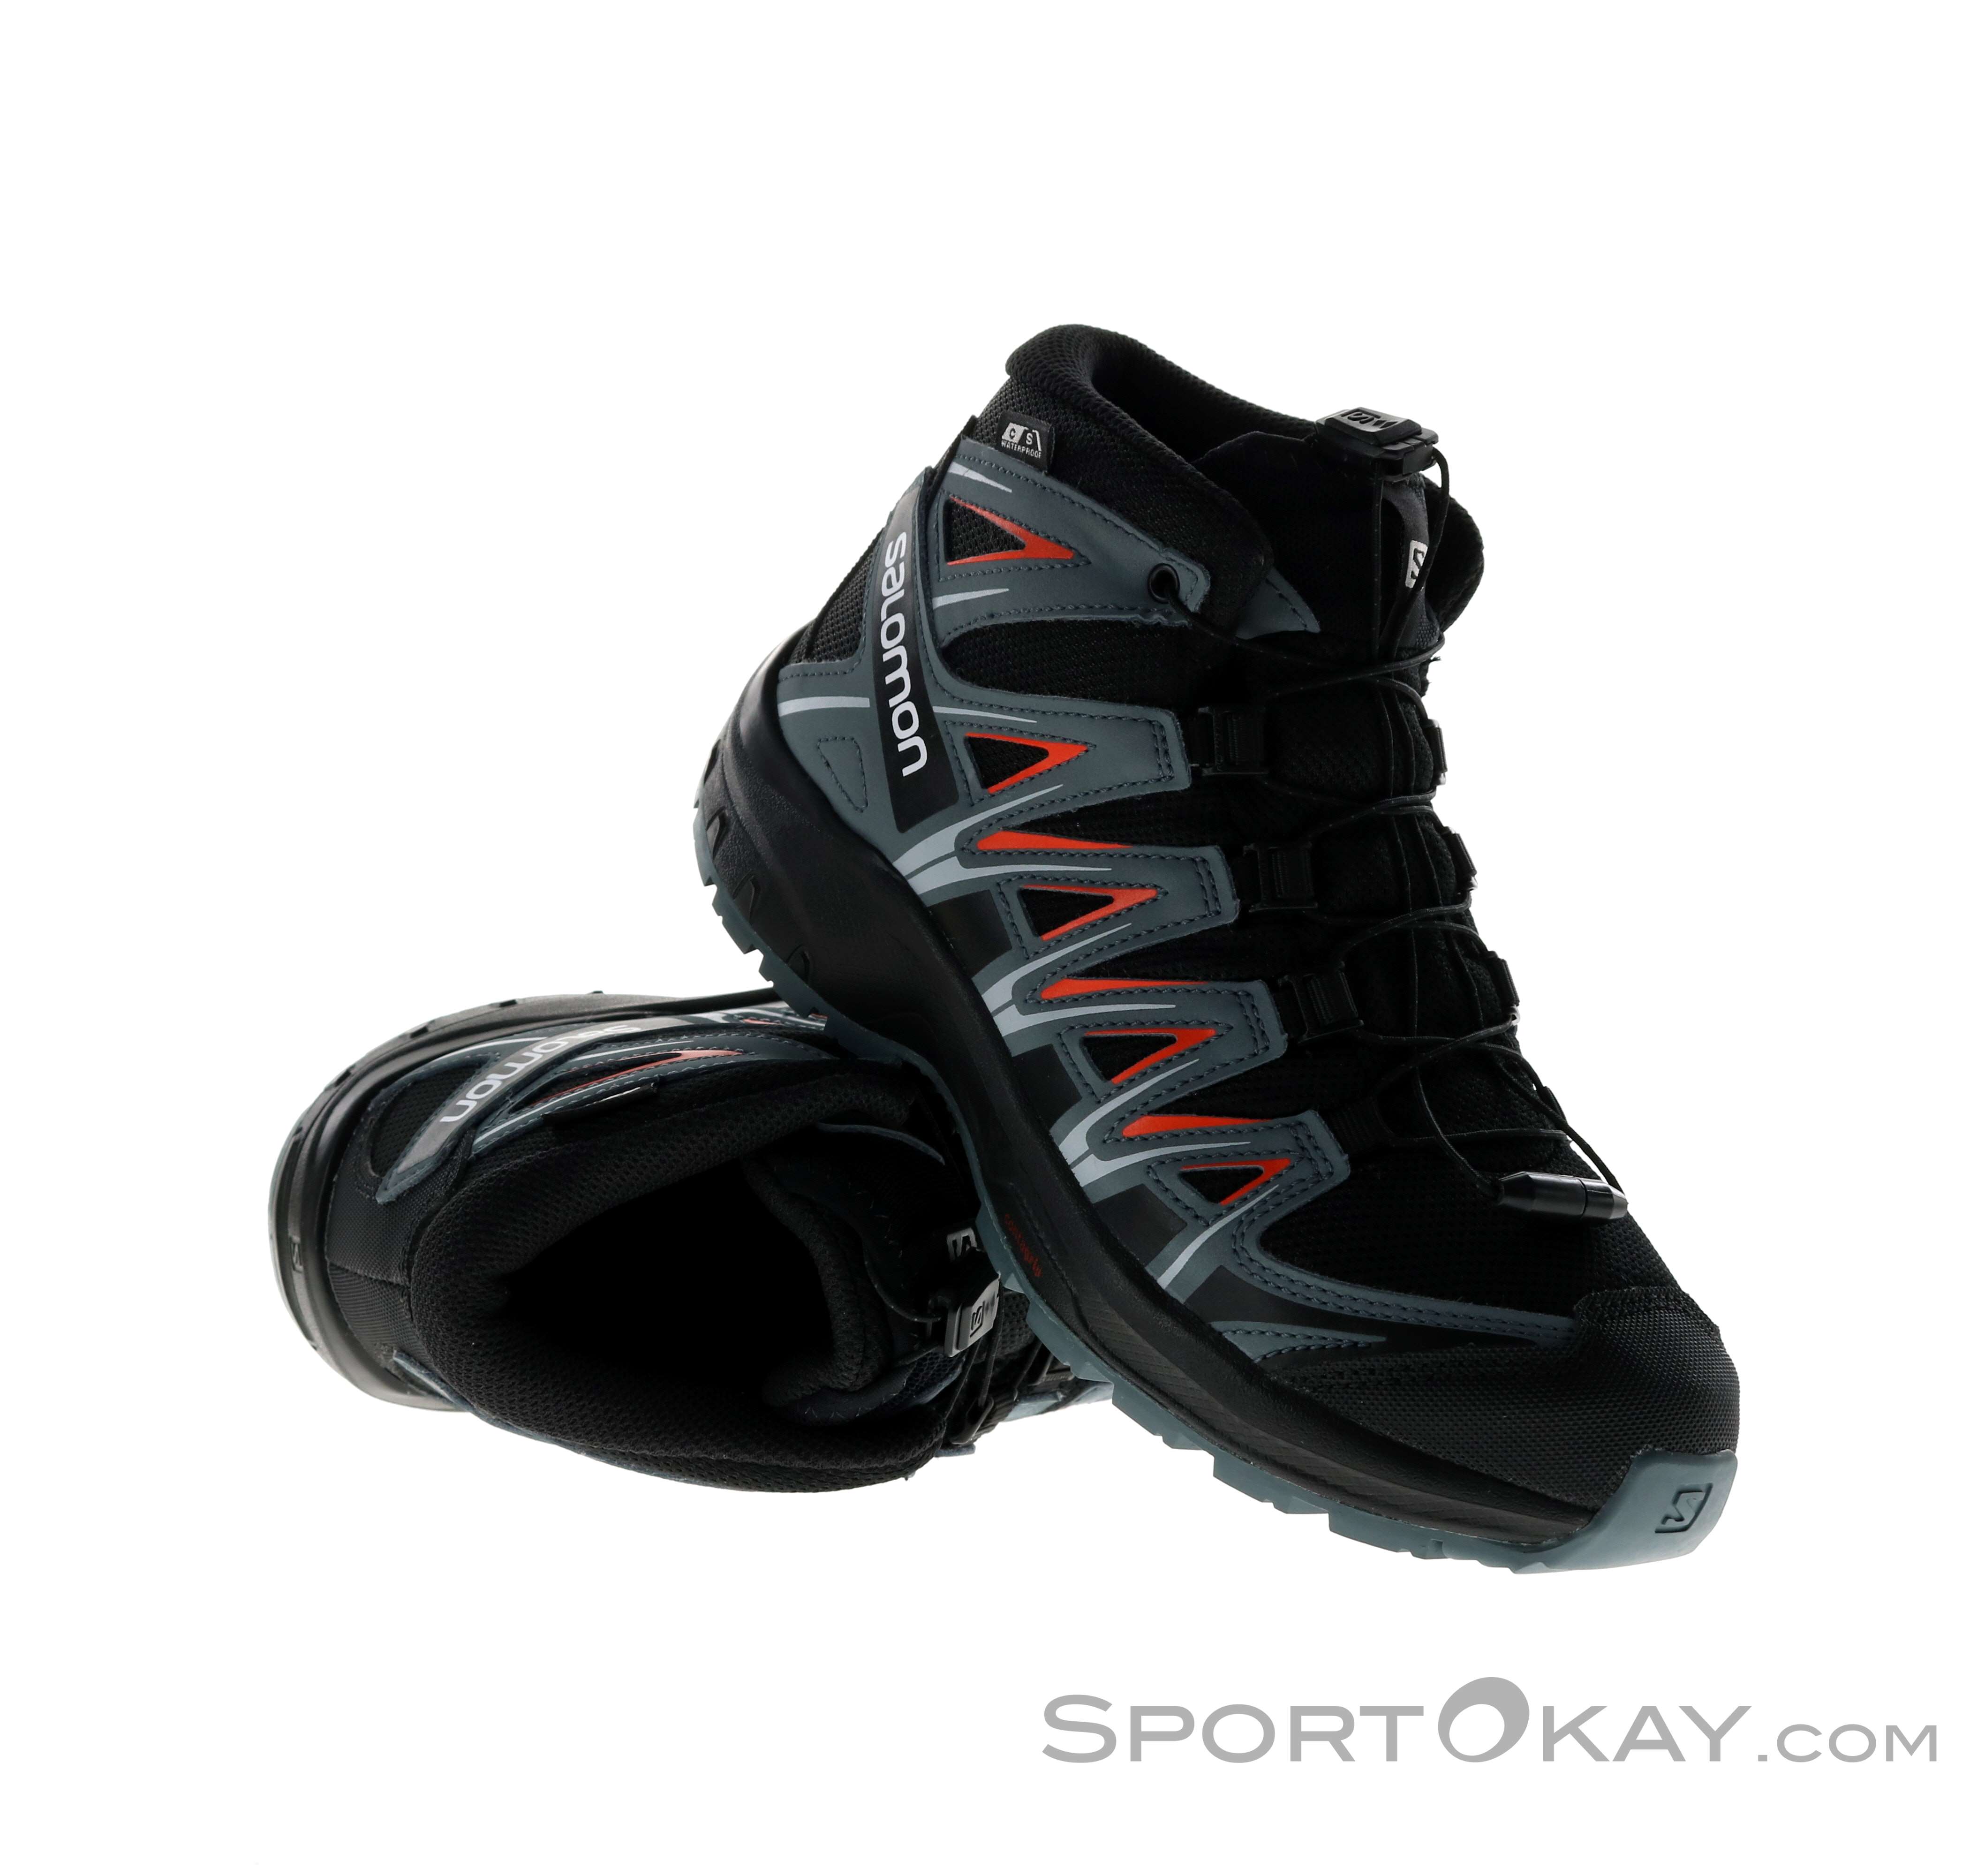 Salomon XA Pro 3D Mid CSWP Outdoor Shoes - Leisure Shoes - Shoes & Poles Outdoor - All